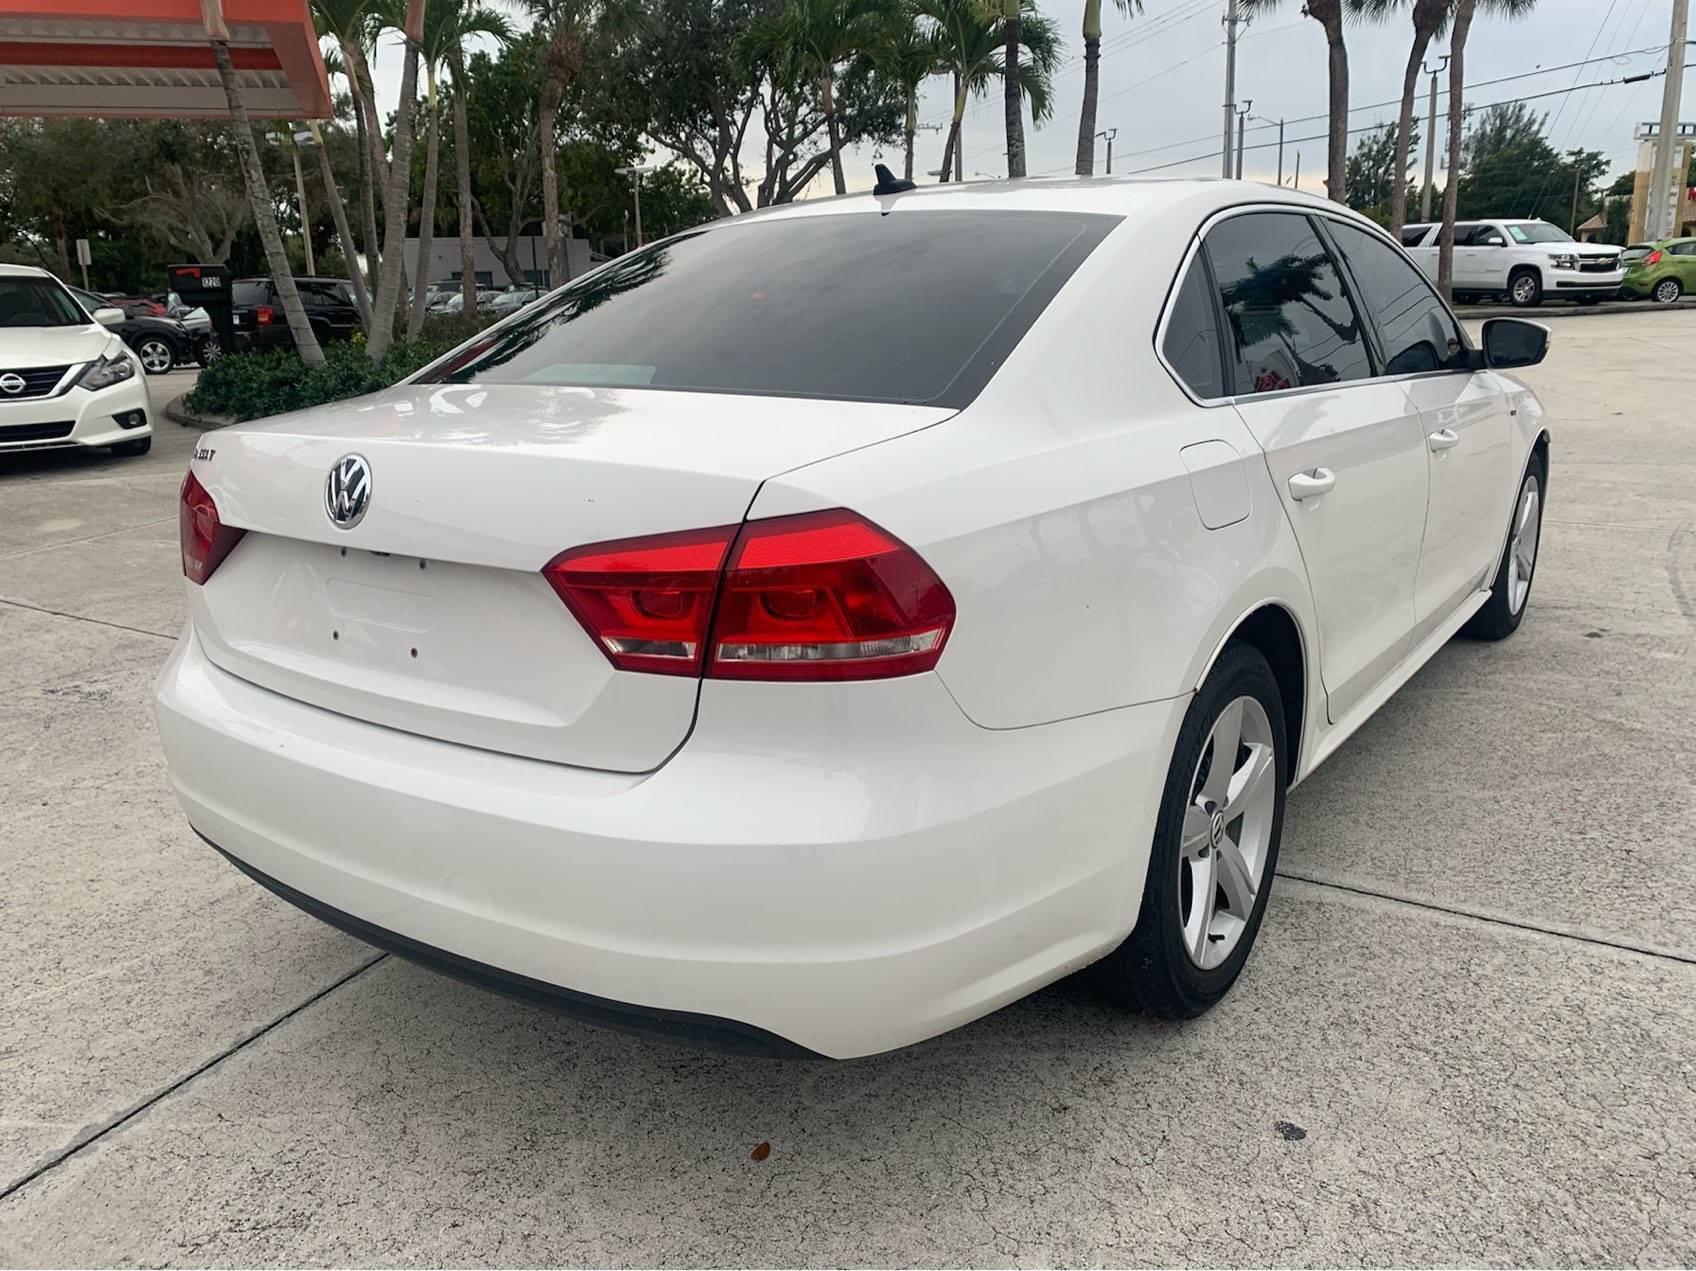 Florida Fine Cars - Used Volkswagen Passat 2015 WEST PALM 1.8T LIMITED EDITION